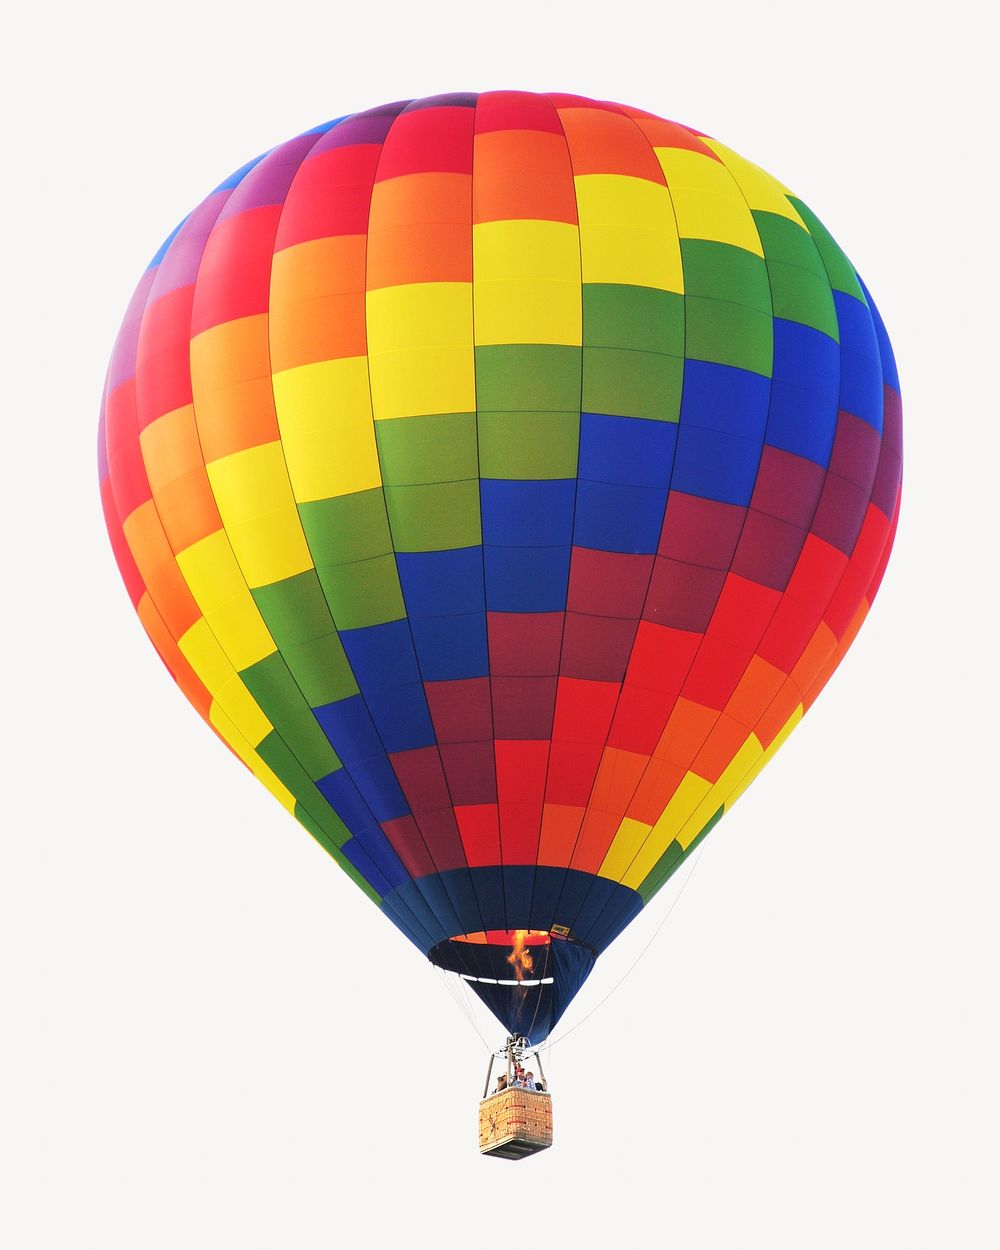 Flying air balloon isolated image on white